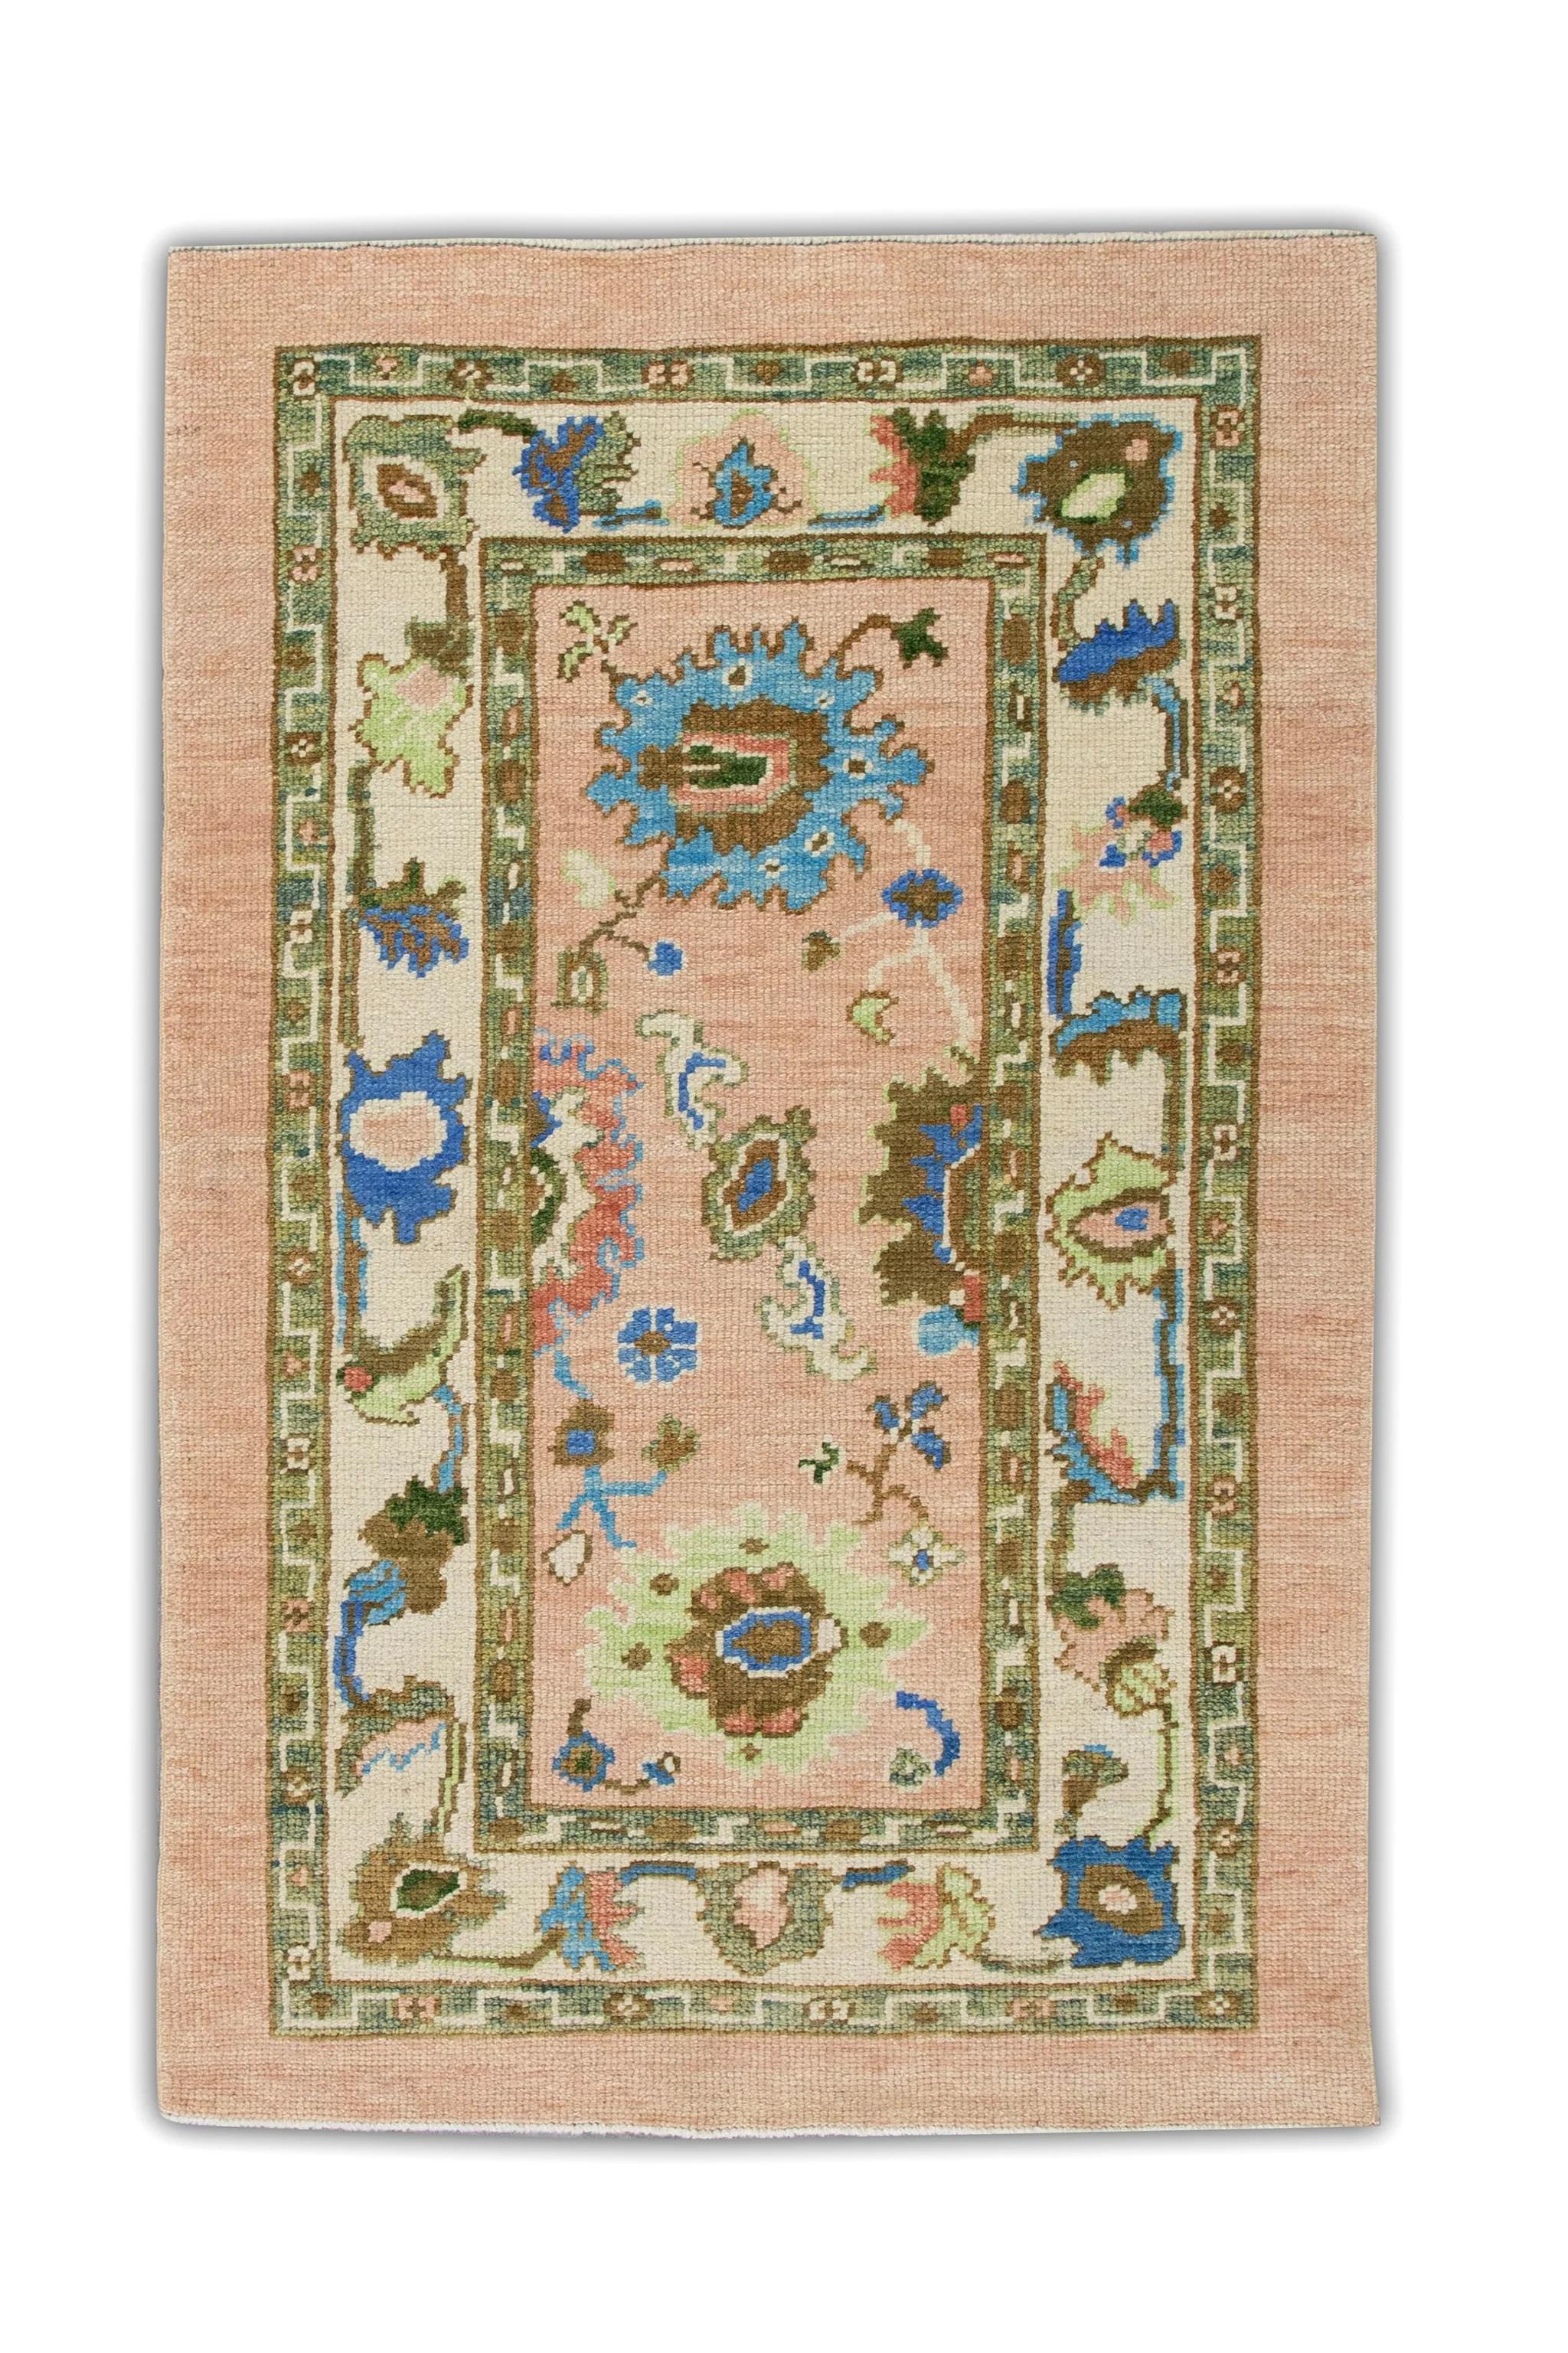 Wool Floral Handwoven Turkish Oushak Rug in Coral, Green, Brown, and Blue 3' x 5'1